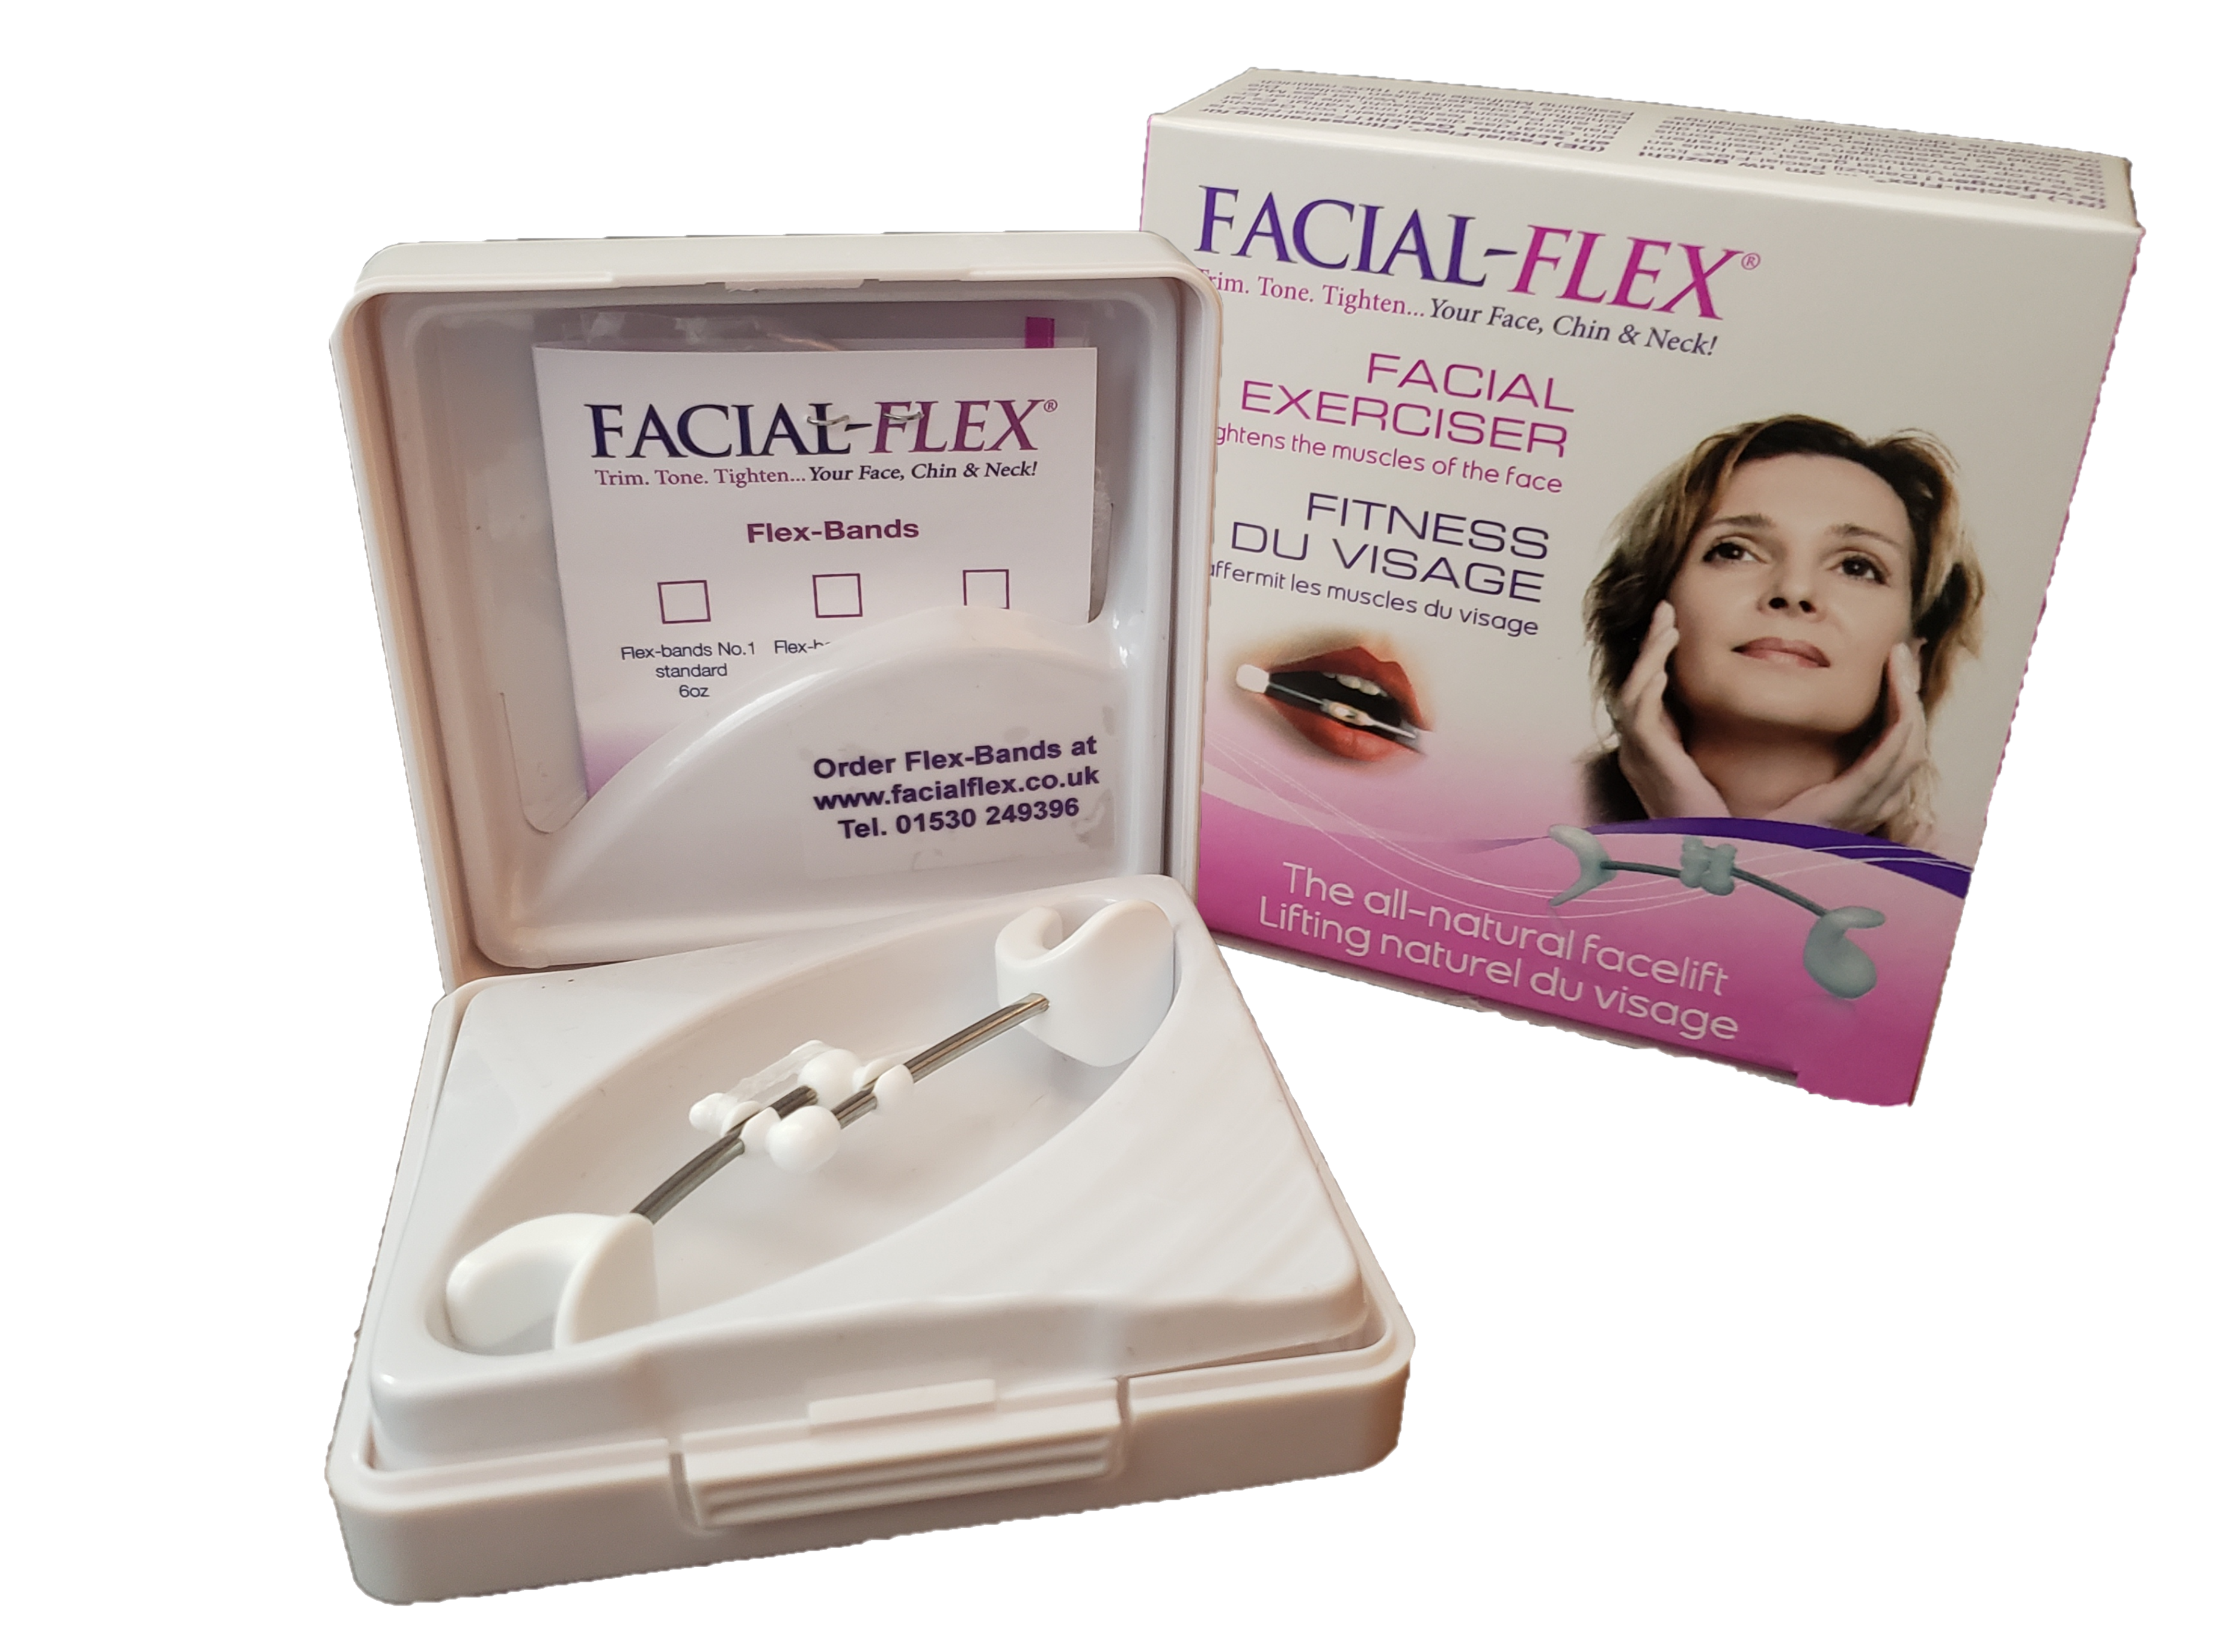 Close up of the Facial Flex outer carton and inner carry case box including the Facial Flex device and packet of resistance bands in situ.